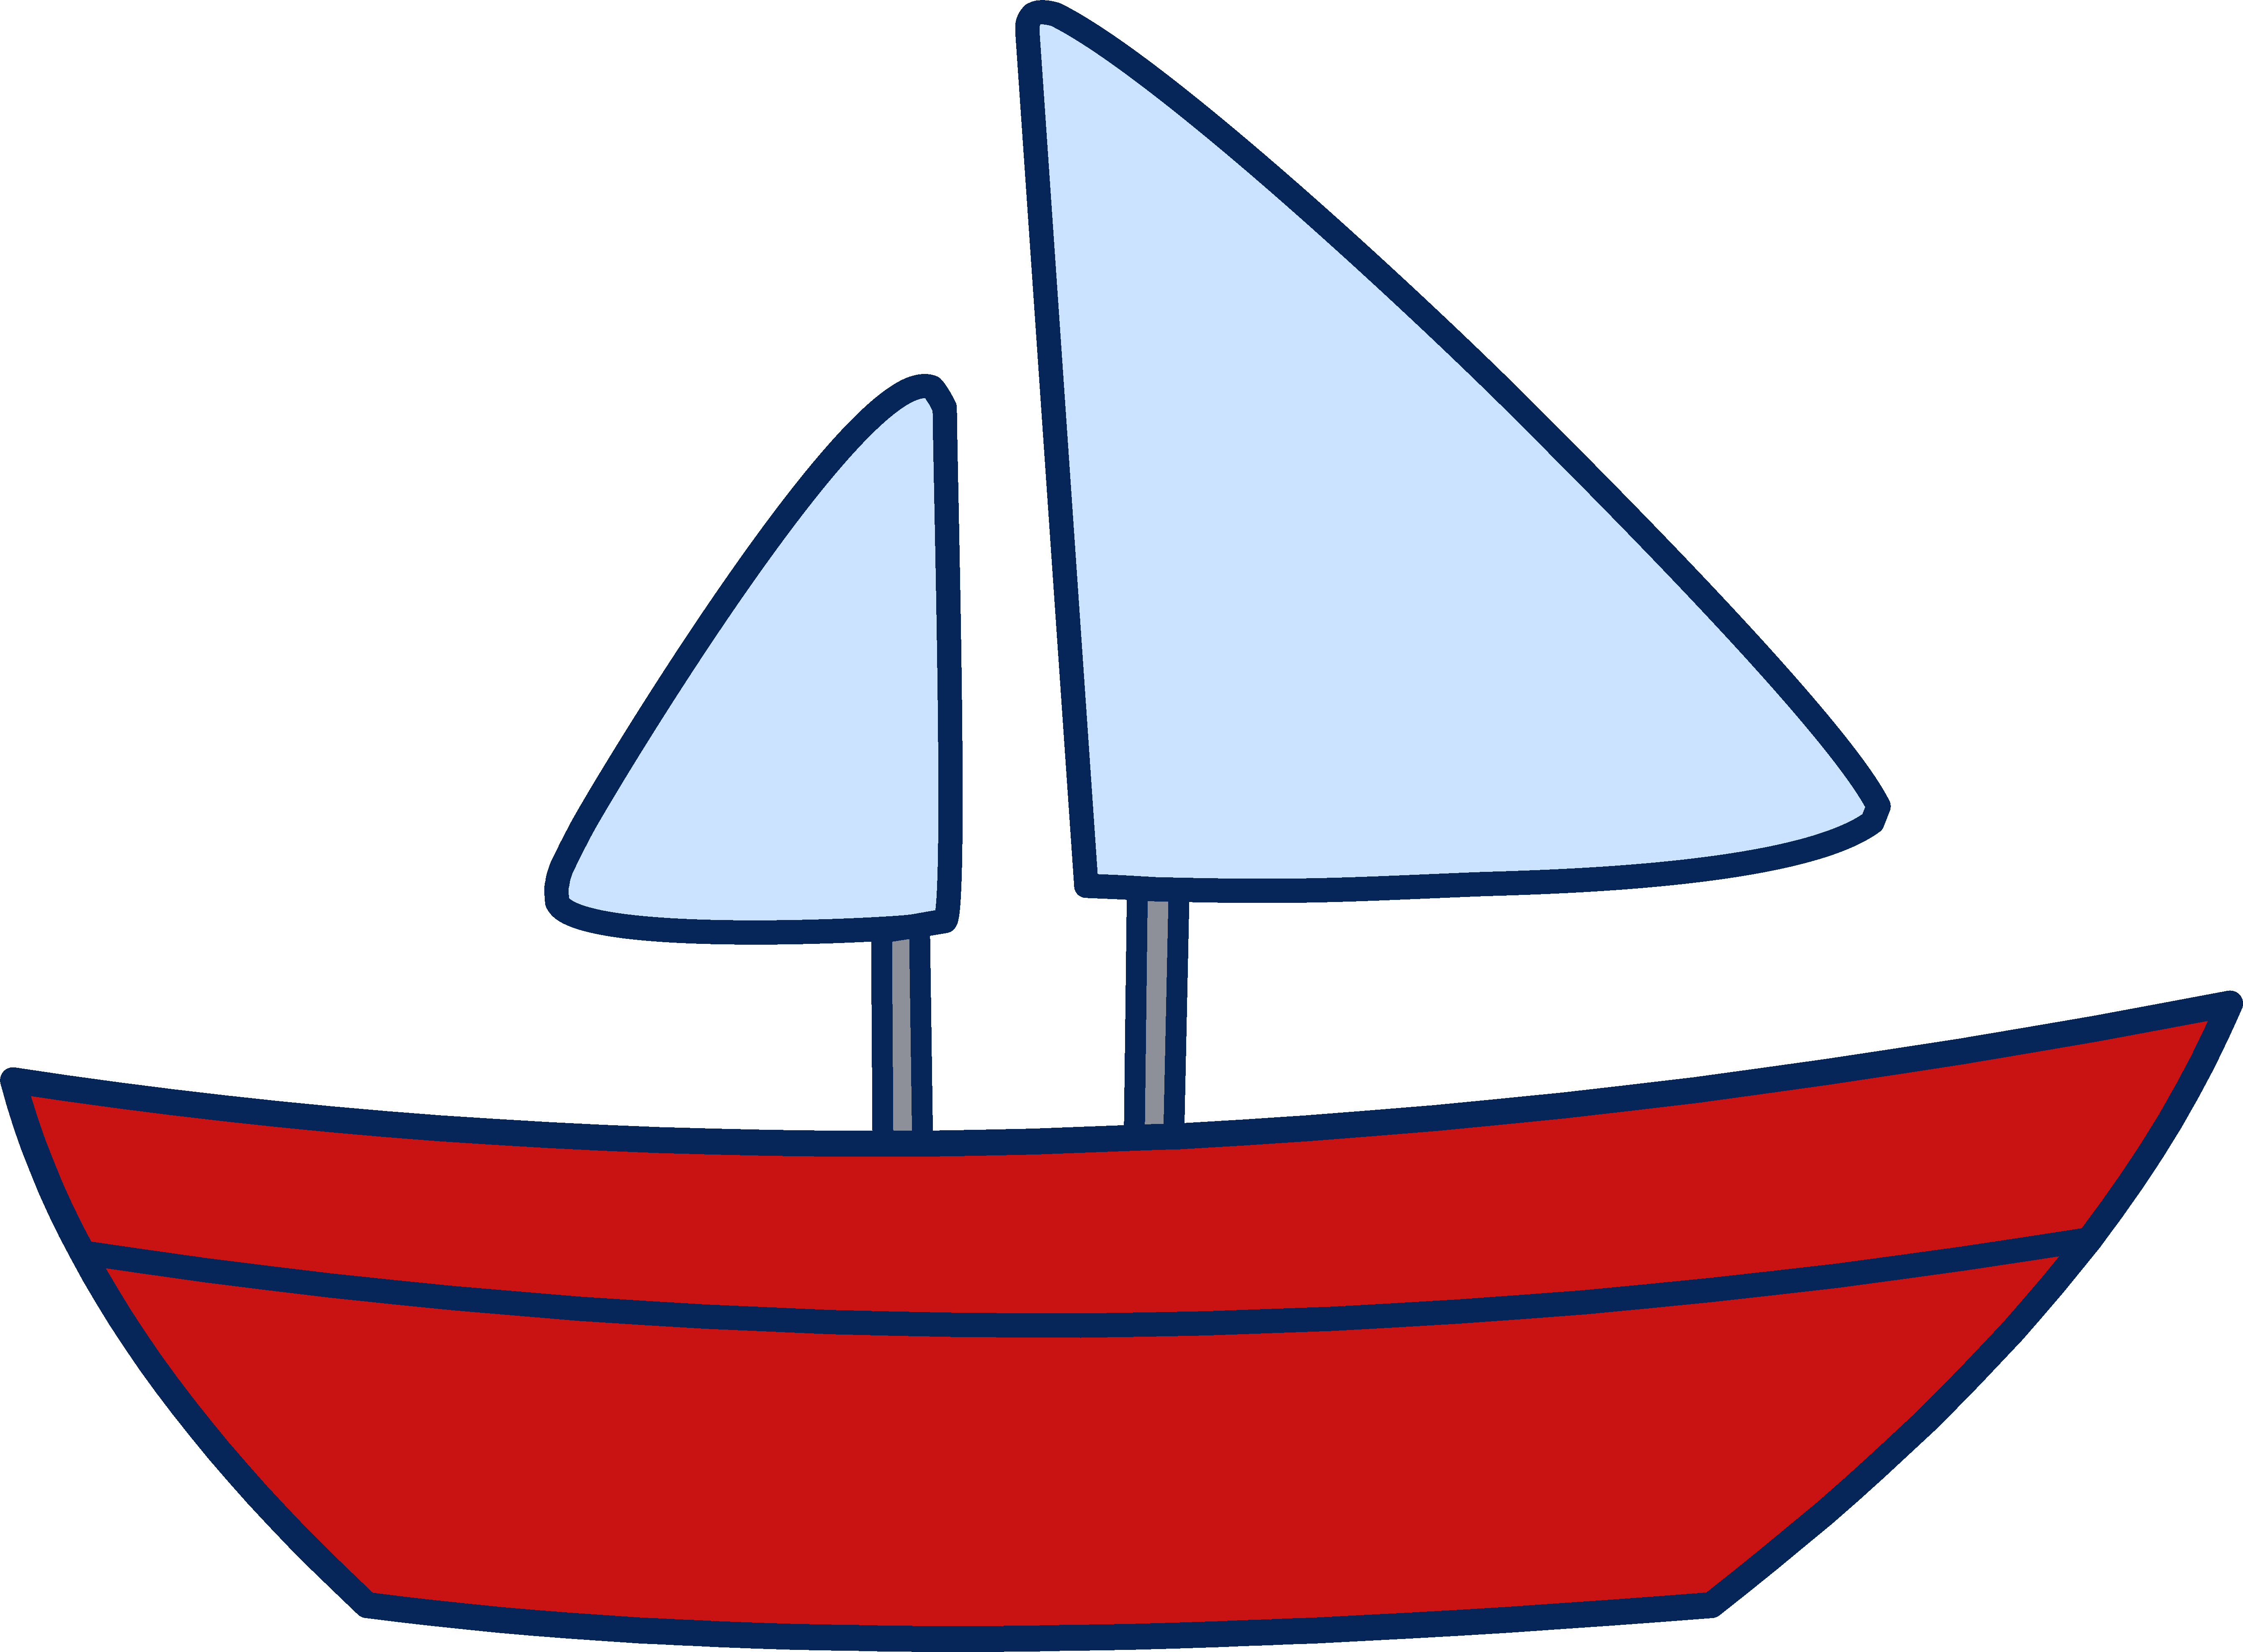 Free Cartoon Boat, Download Free Cartoon Boat png images, Free ClipArts on Clipart Library